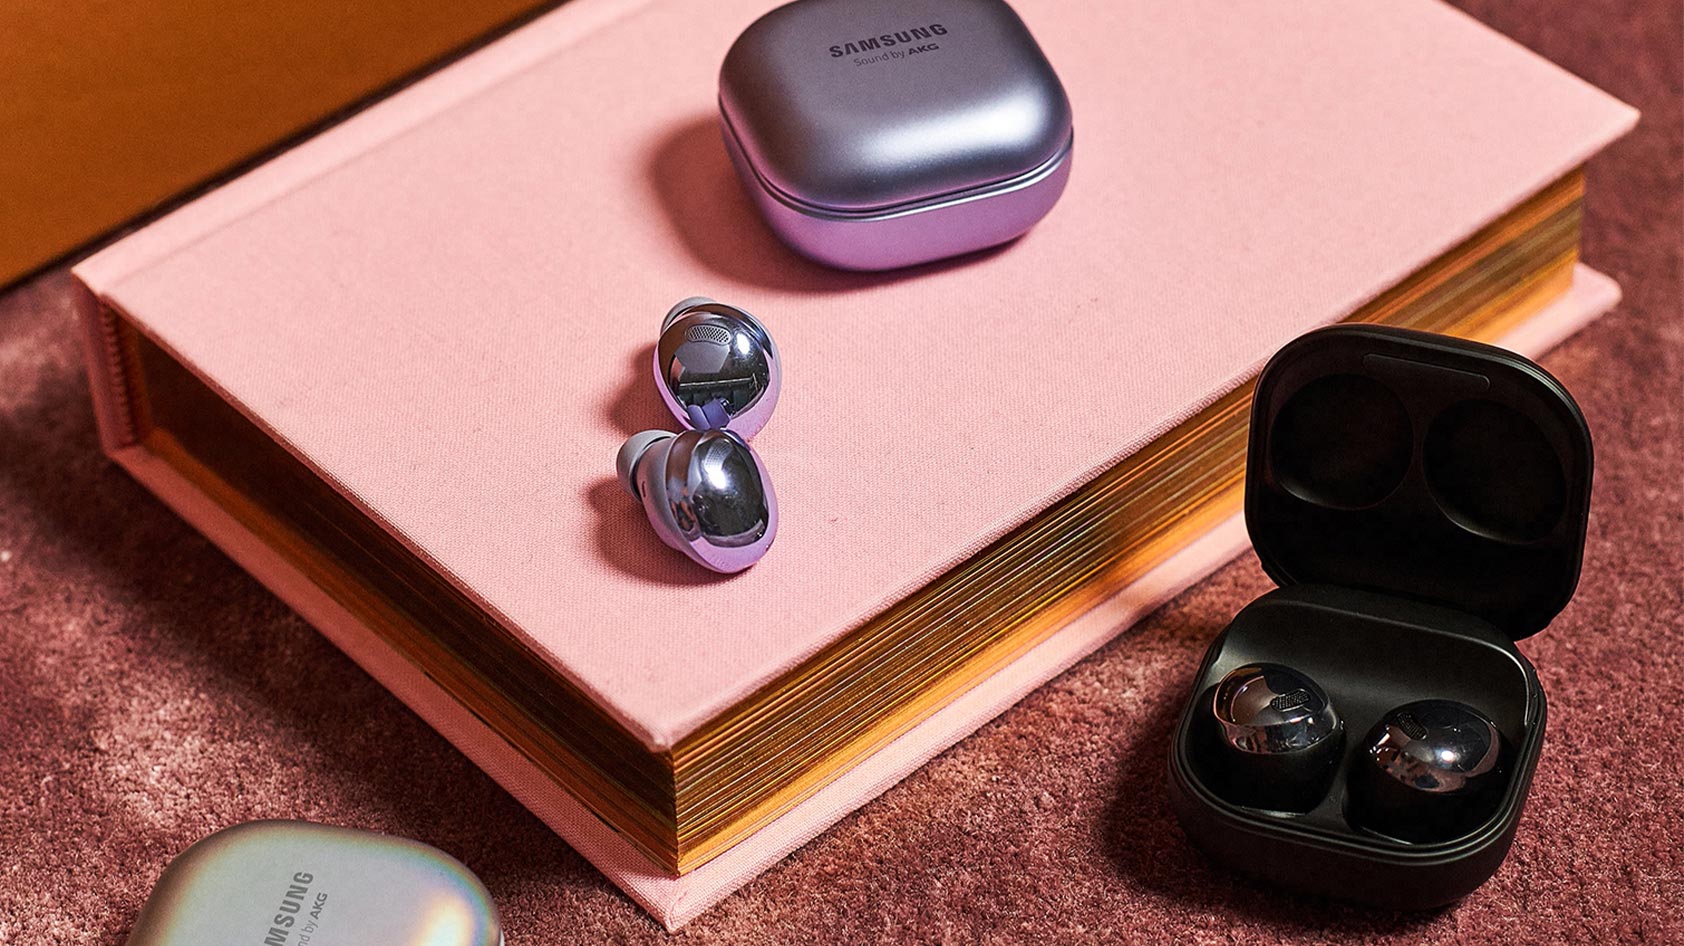 The Samsung Galaxy Buds Pro in purple, silver, and black, against a pink book and background.